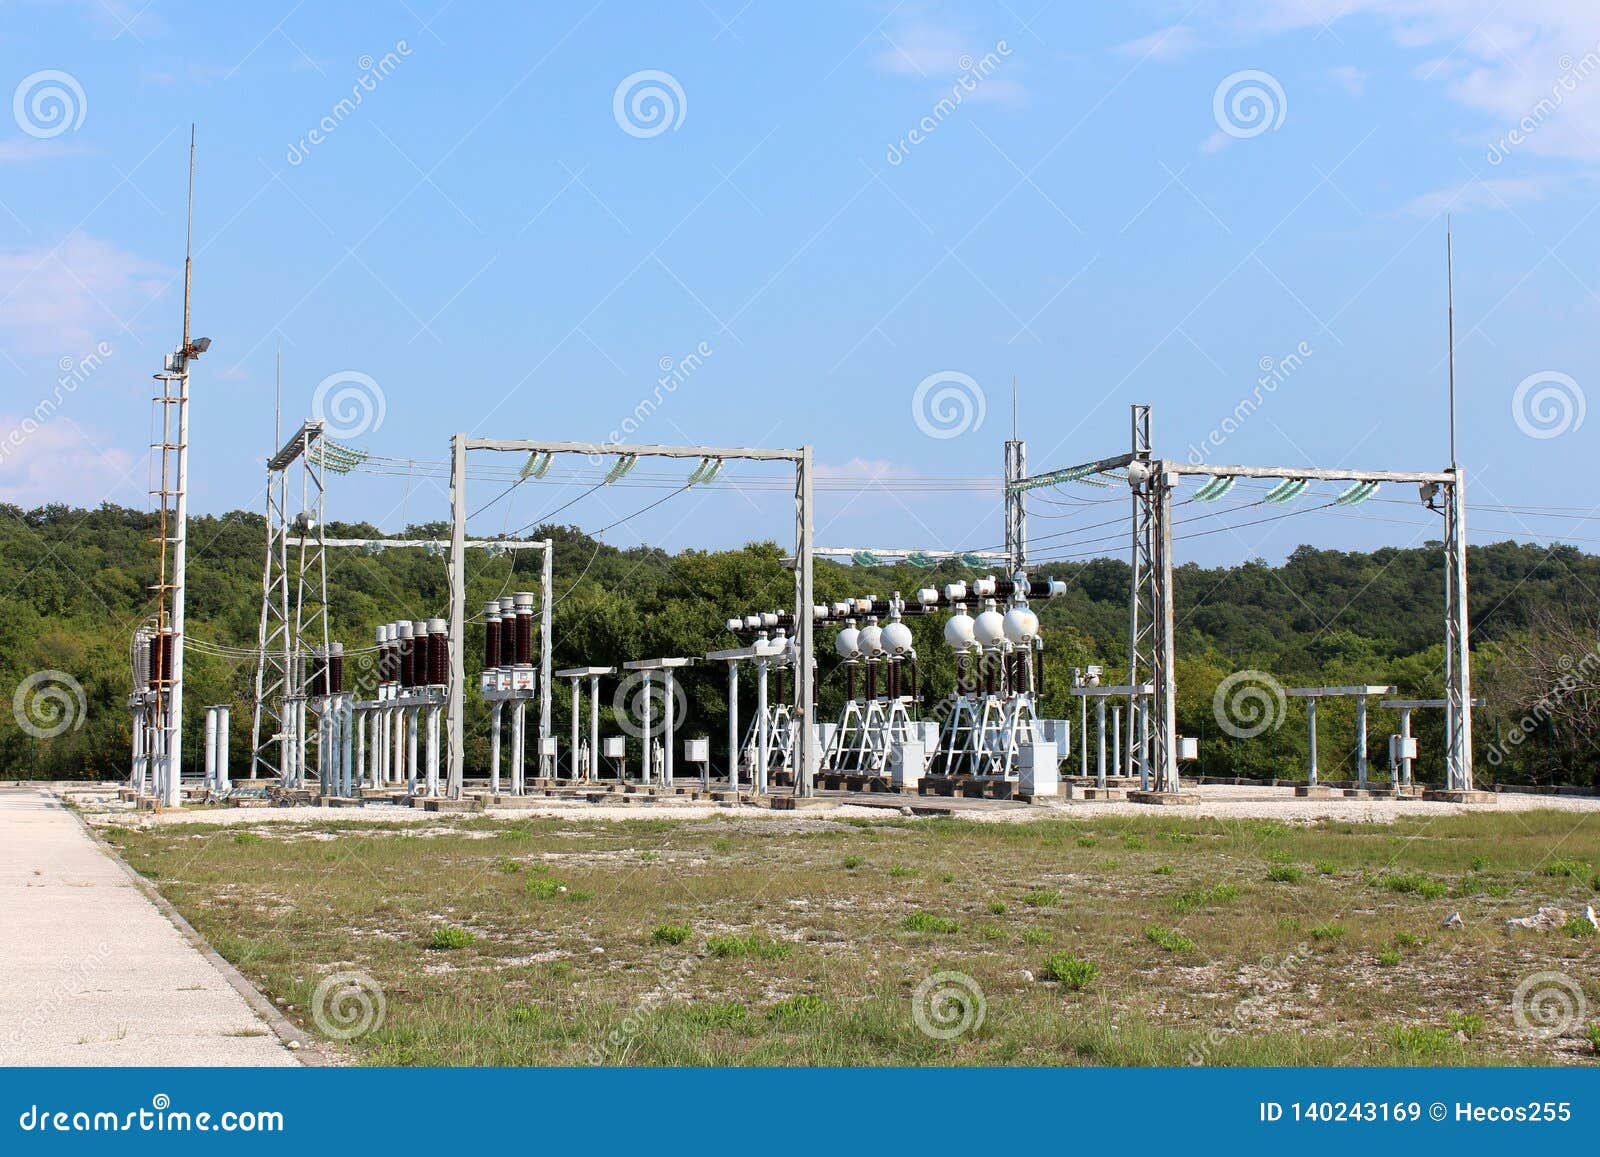 Local Power Plant Array of Support Equipment Made of Various Devices with Ceramic and Glass Insulators Connected Stock Image Image of local, support: 140243169